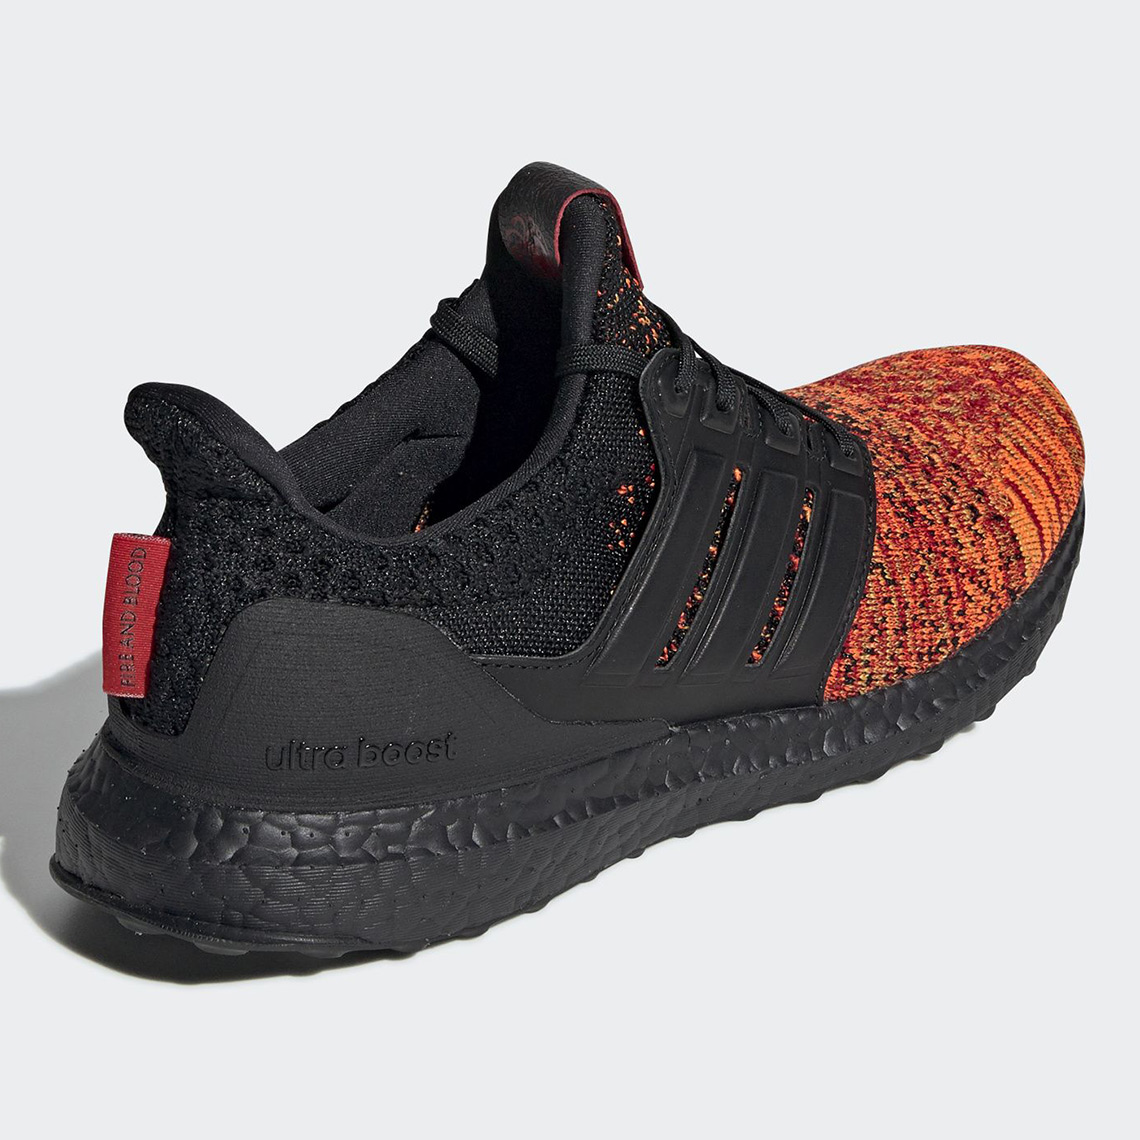 adidas ultra boost game of thrones buy